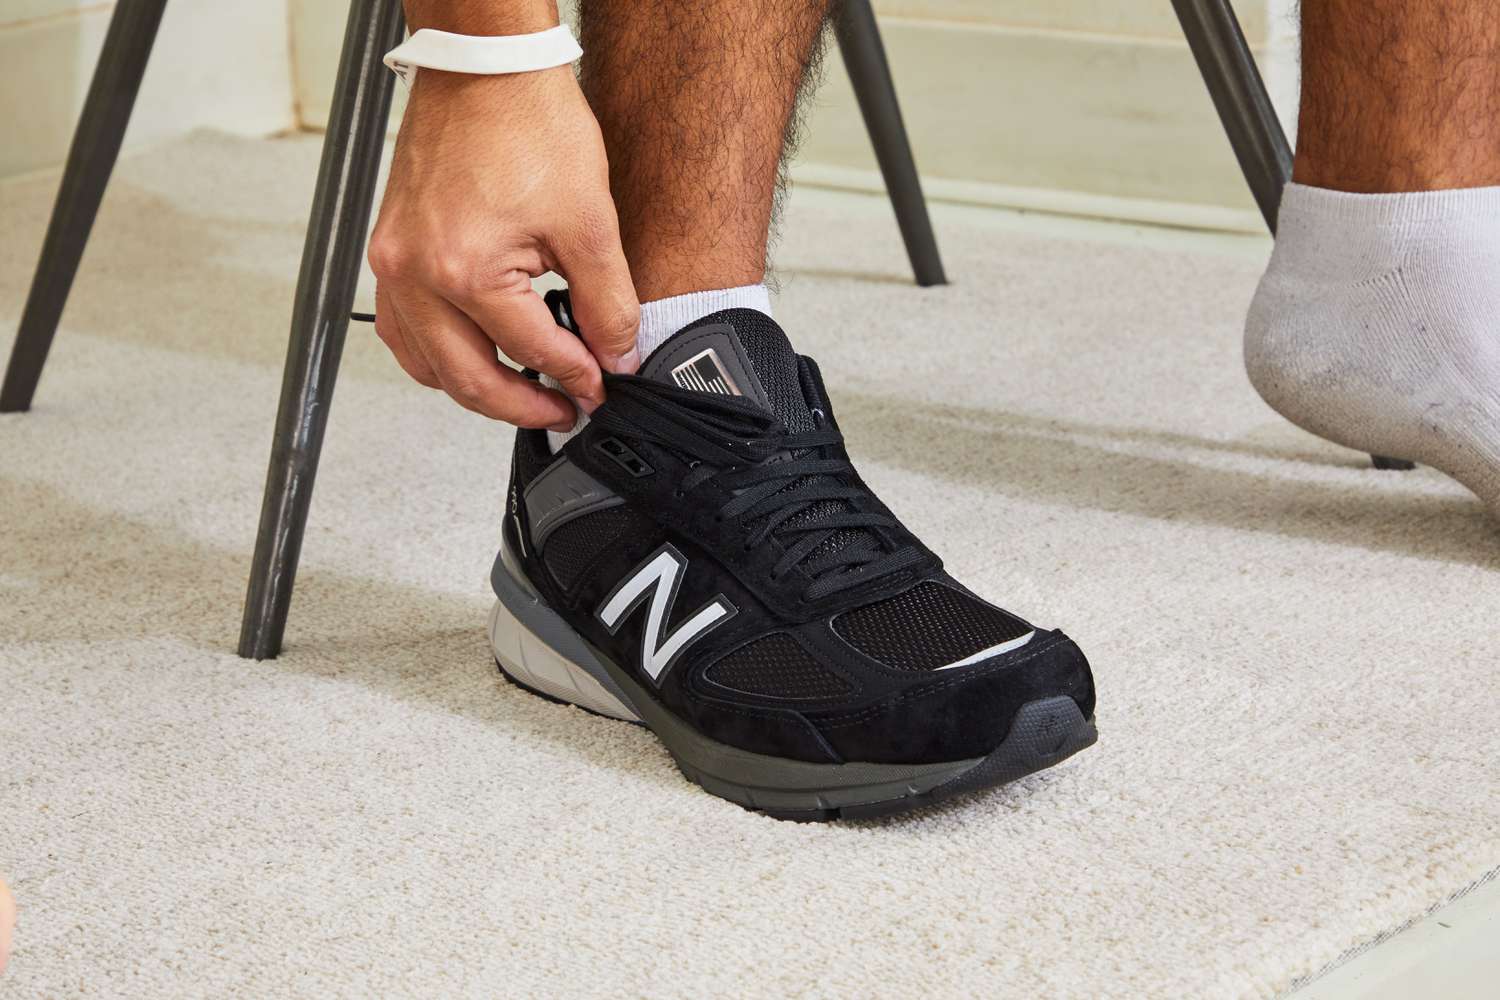 Hand adjusting the laces on the New Balance Men’s M990v5 Running Shoes displayed against a white rug 